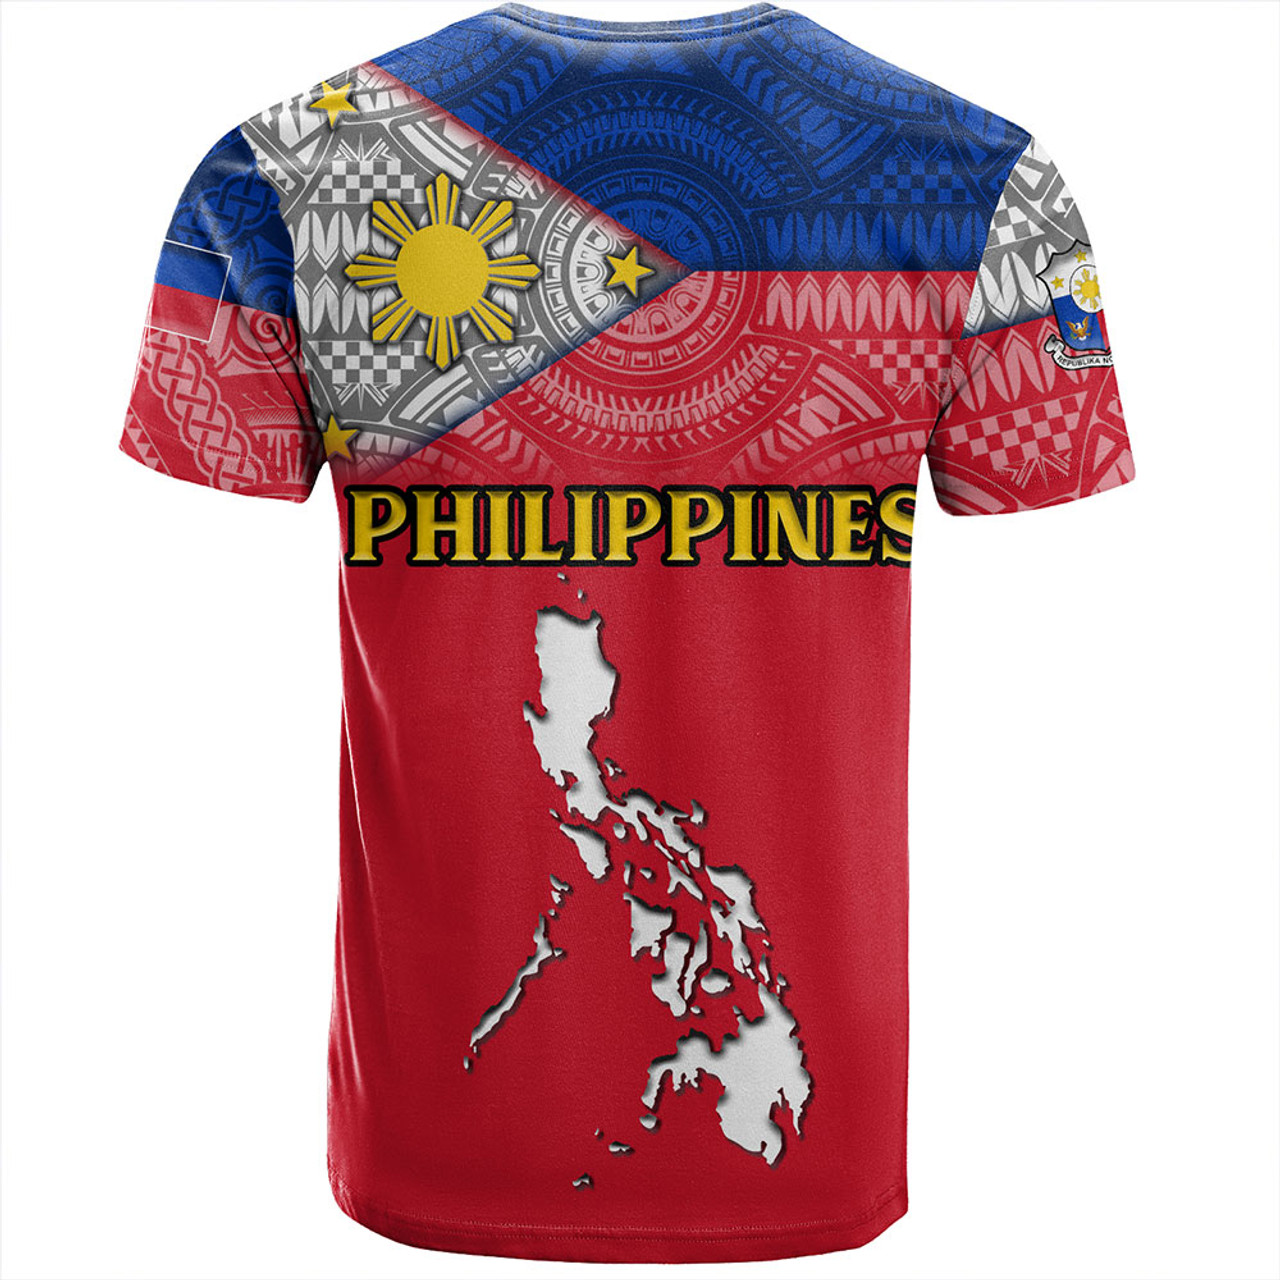 Philippines T-Shirt - Philippines Map And Flag Color Style